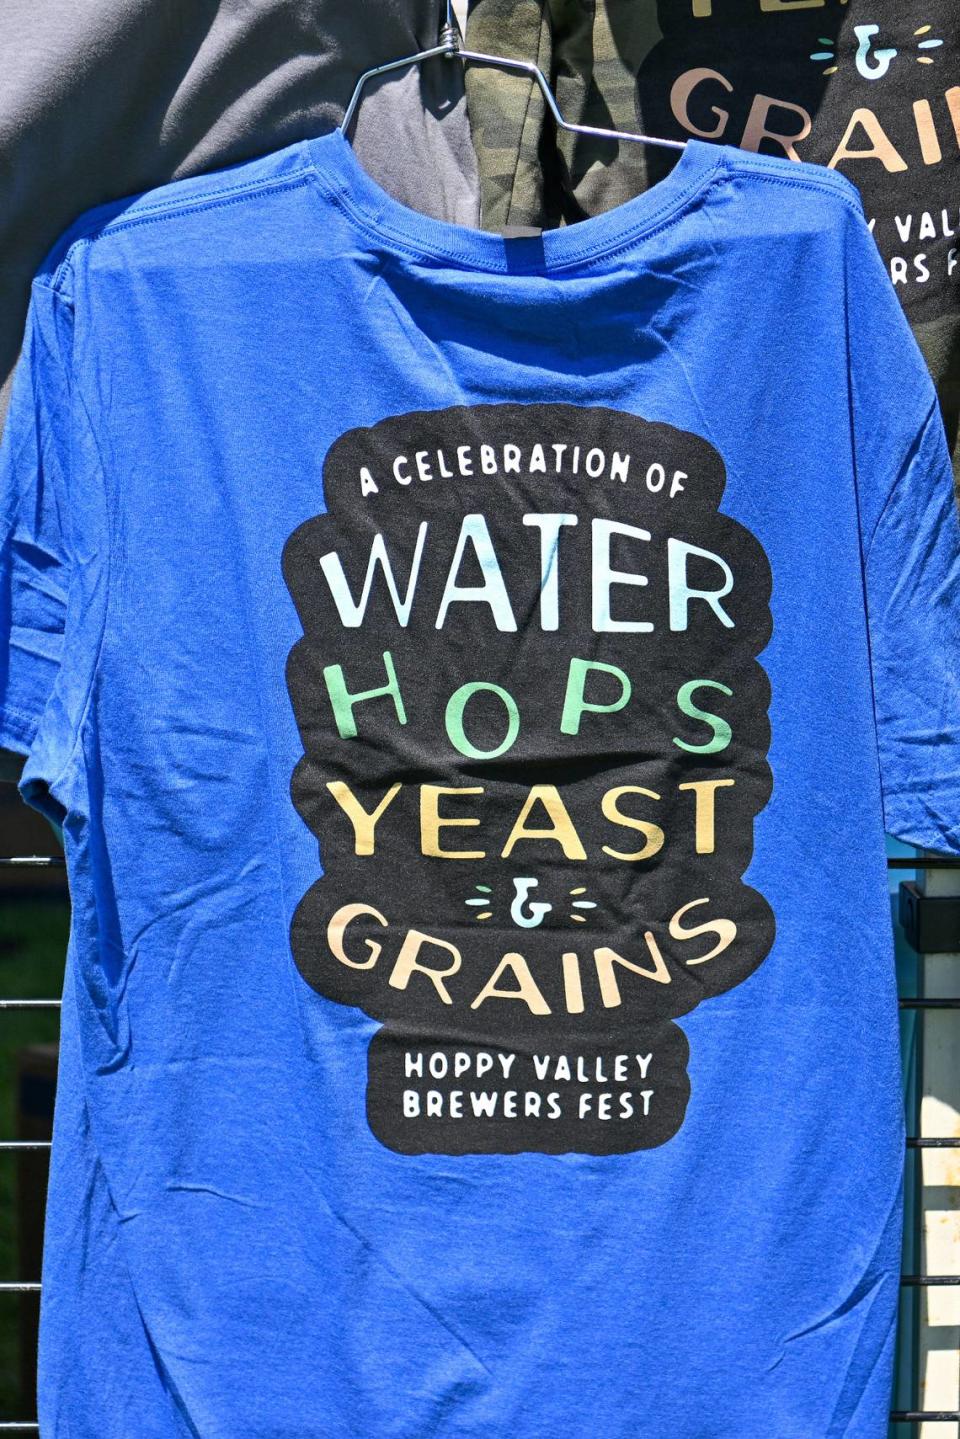 A closer look at one of the T-shirts on sale at the Hoppy Valley Brewers Fest on Saturday at Penn State’s Beaver Stadium. Jeff Shomo/For the CDT